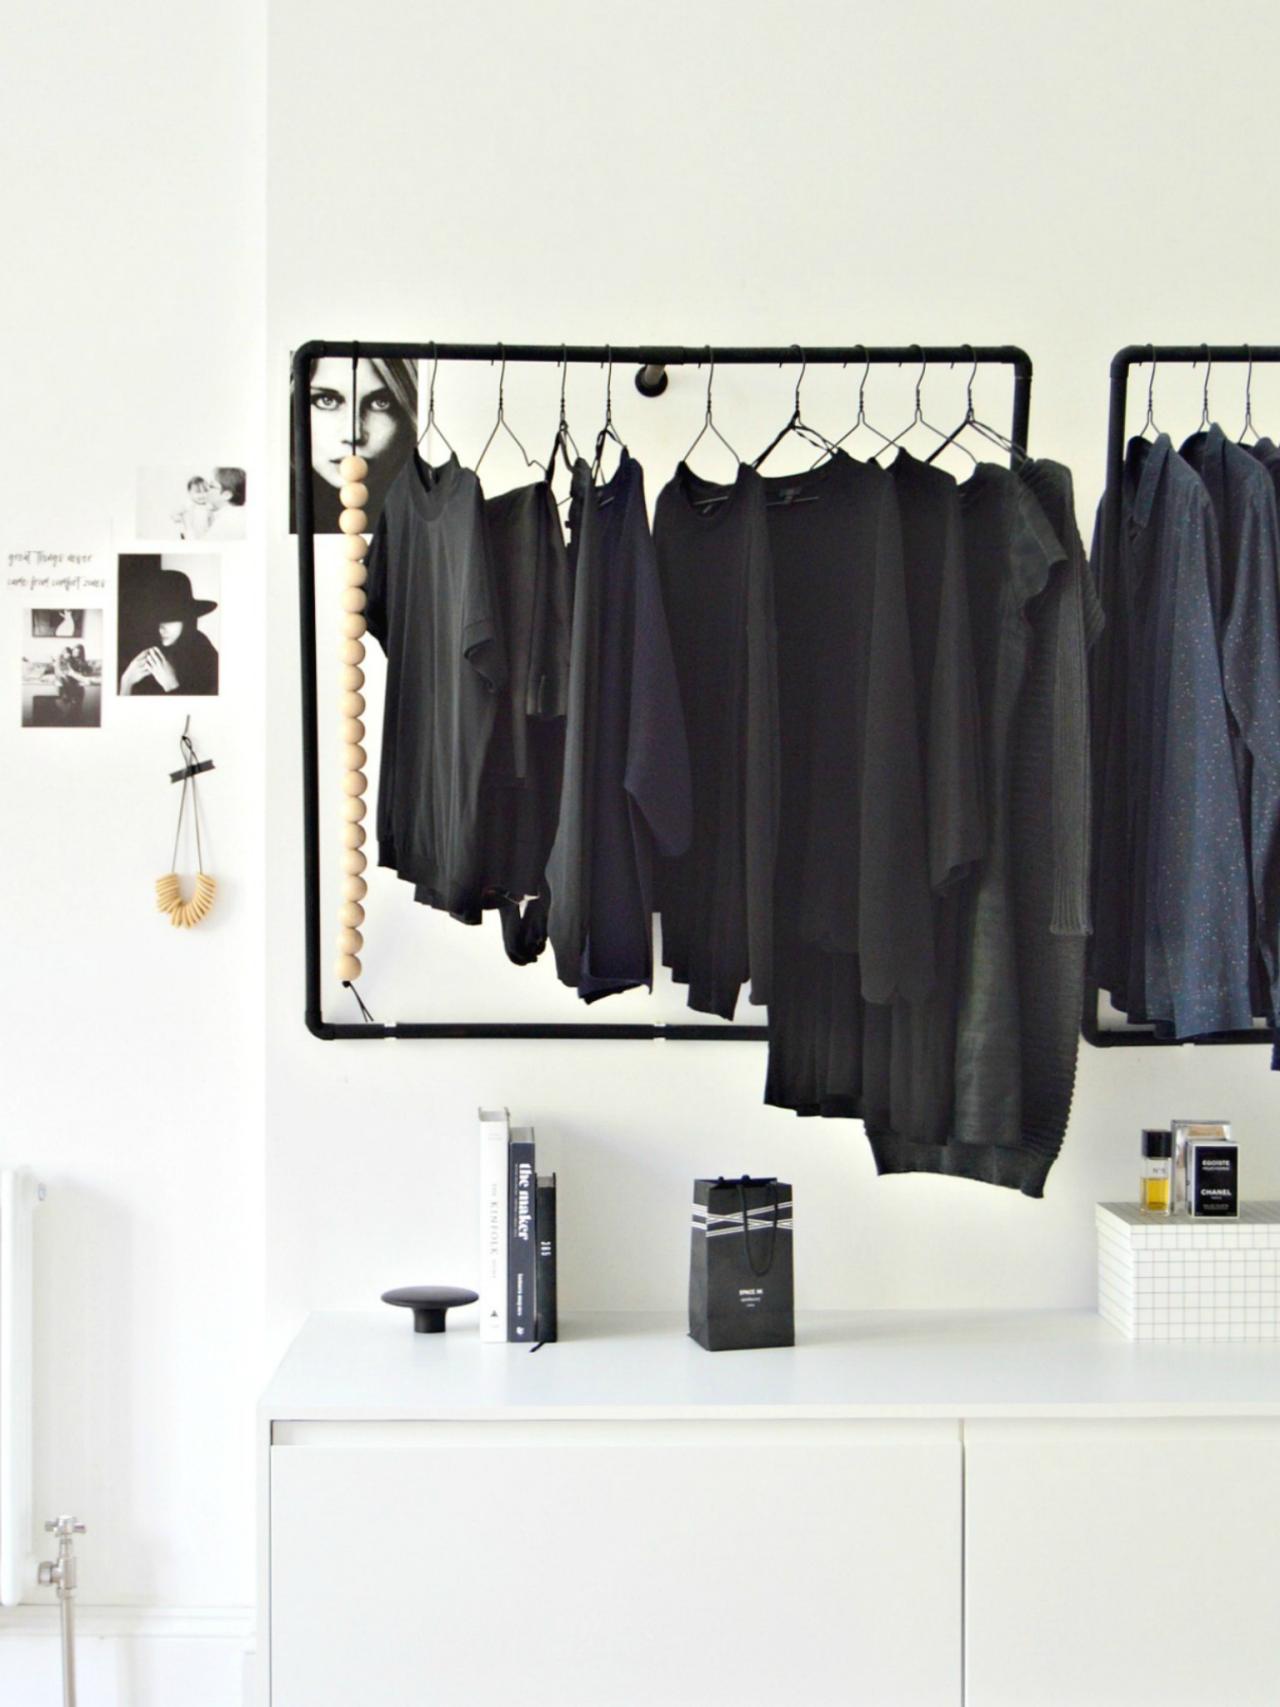 12 No-Closet Clothes Storage Ideas, Room Makeovers to Suit Your Life